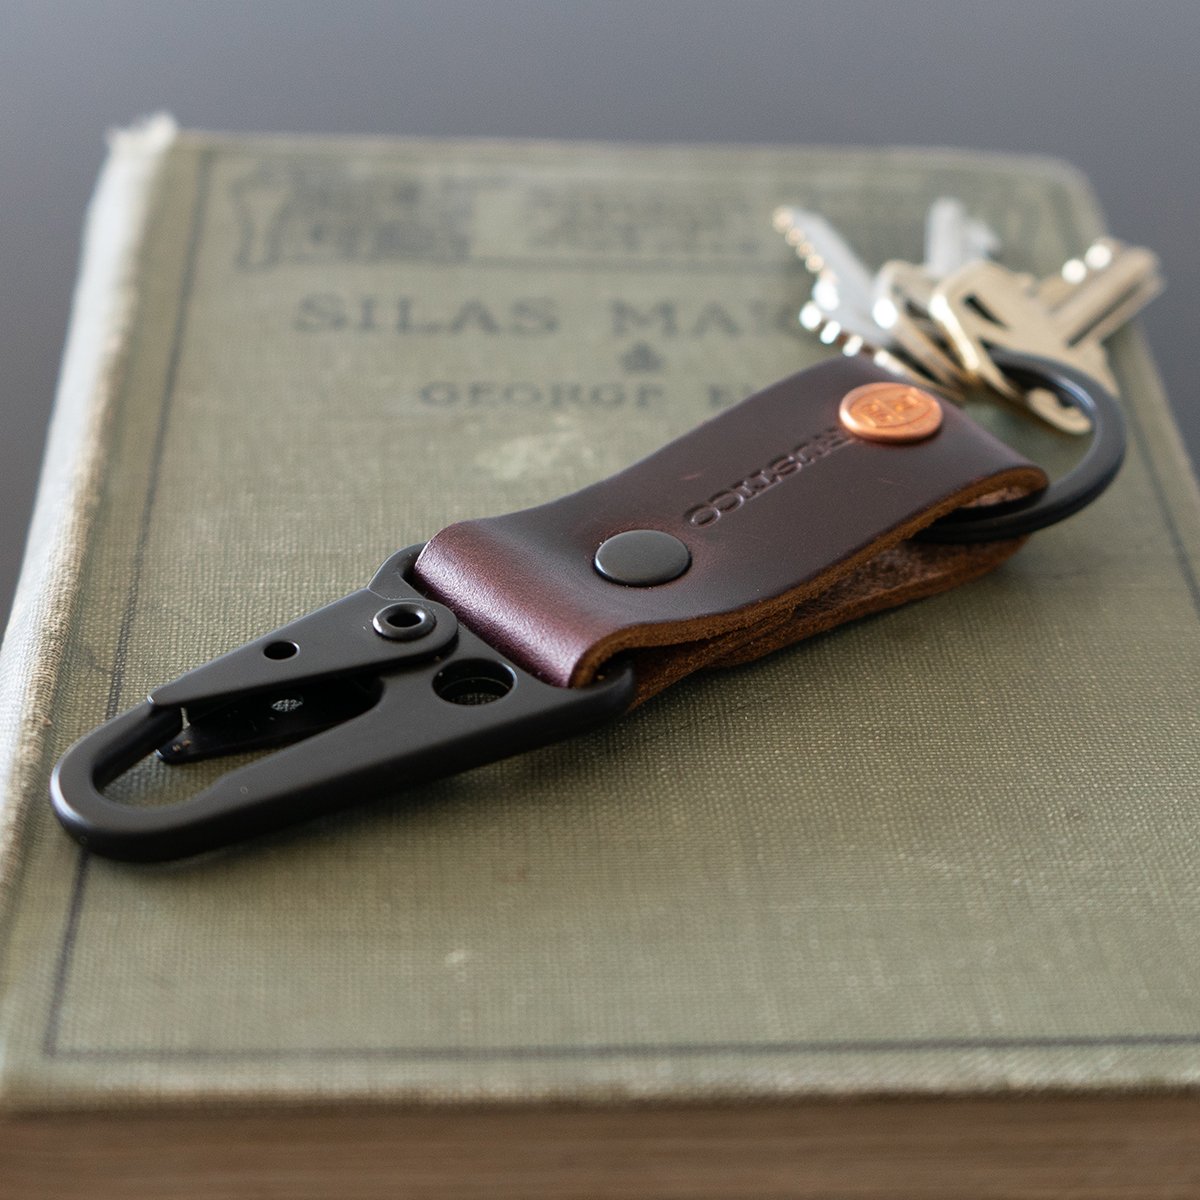 Small Tag Leather Keychain - Great gift – Rustico Corporate